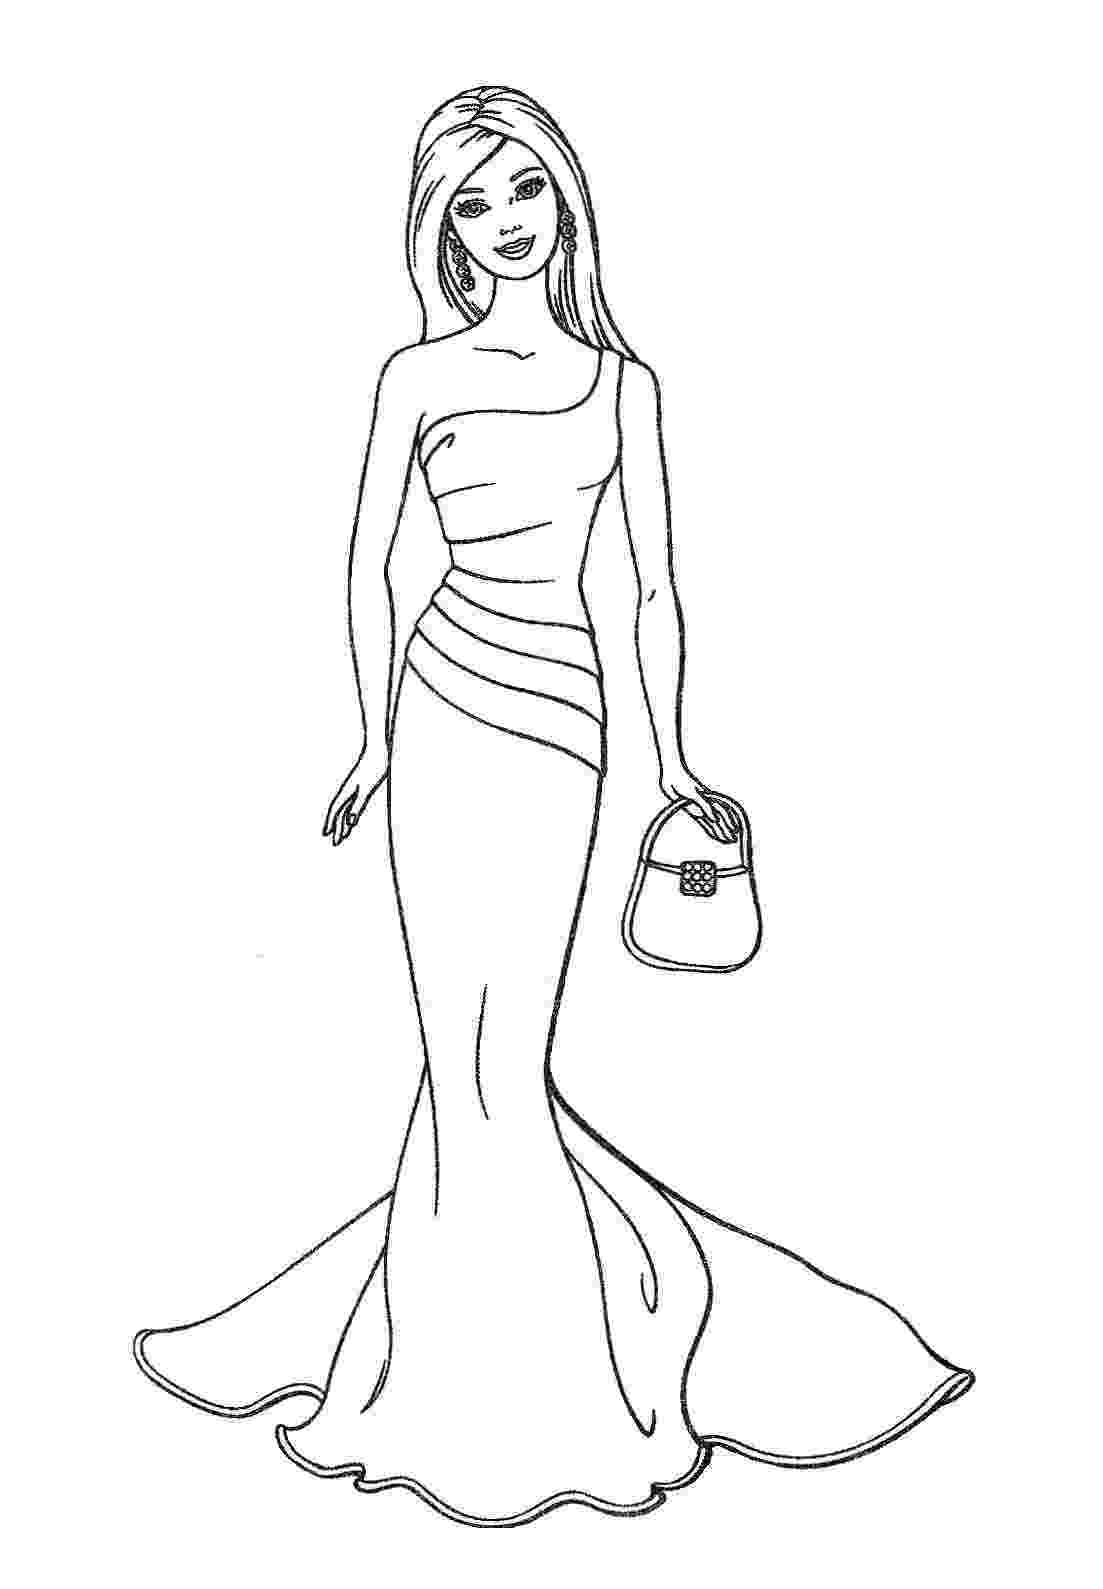 barbie color pages to print barbie coloring pages coloring pages for kids color to barbie print pages 